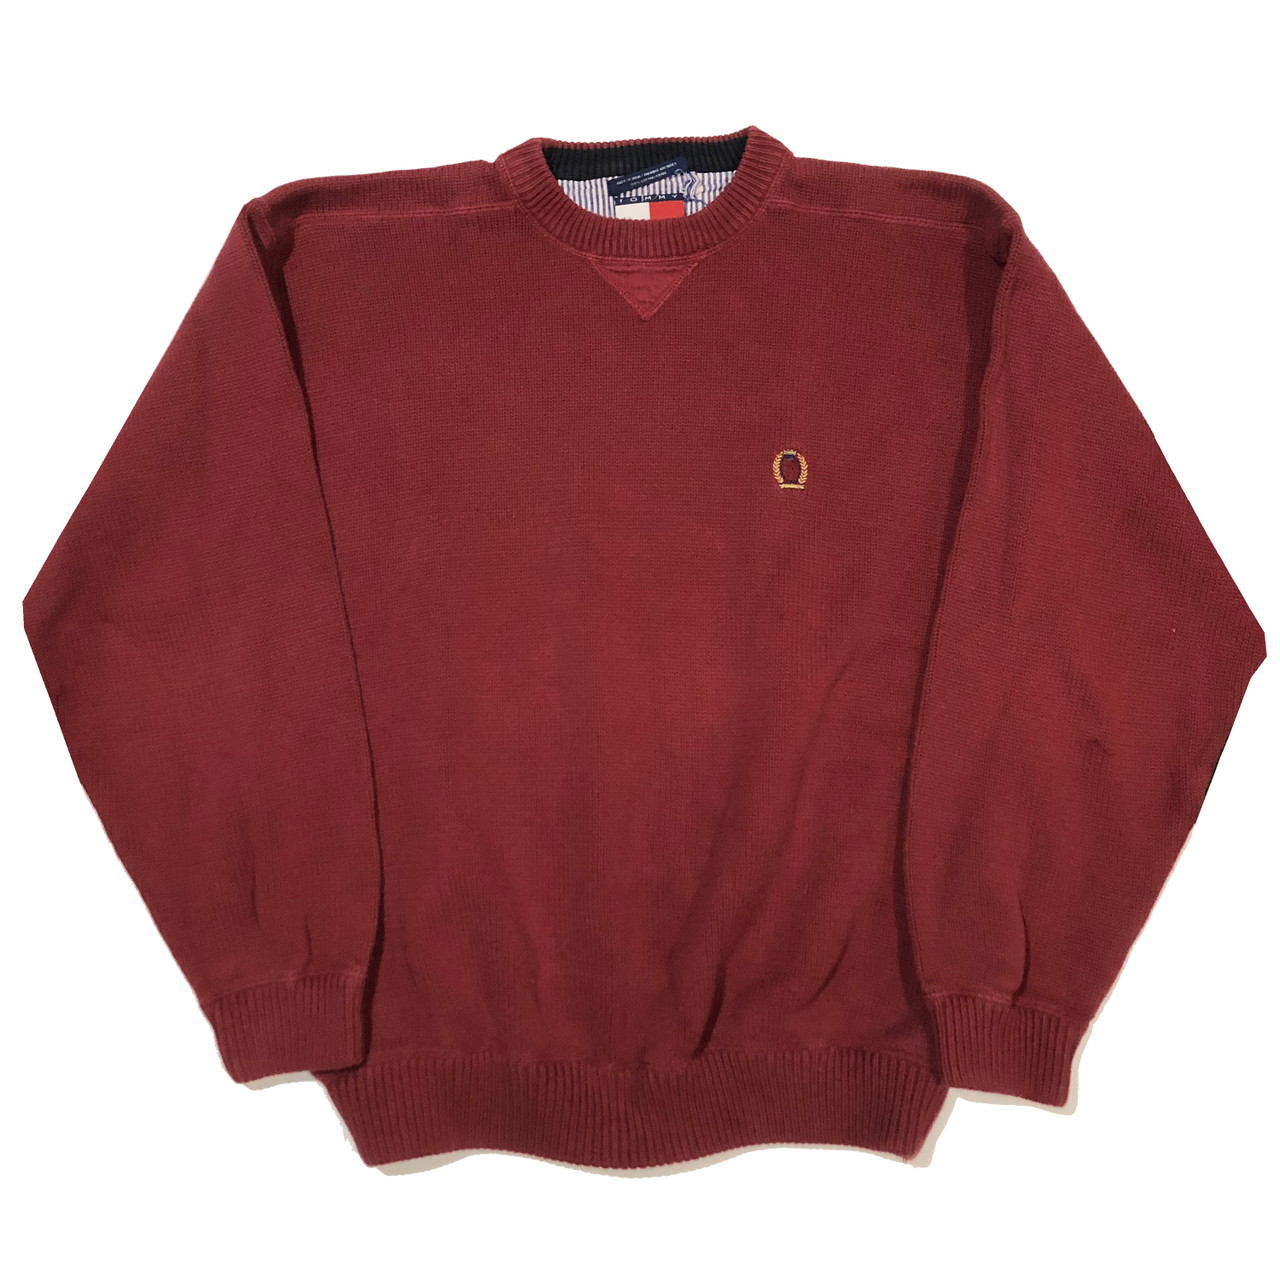 tommy hilfiger red sweater